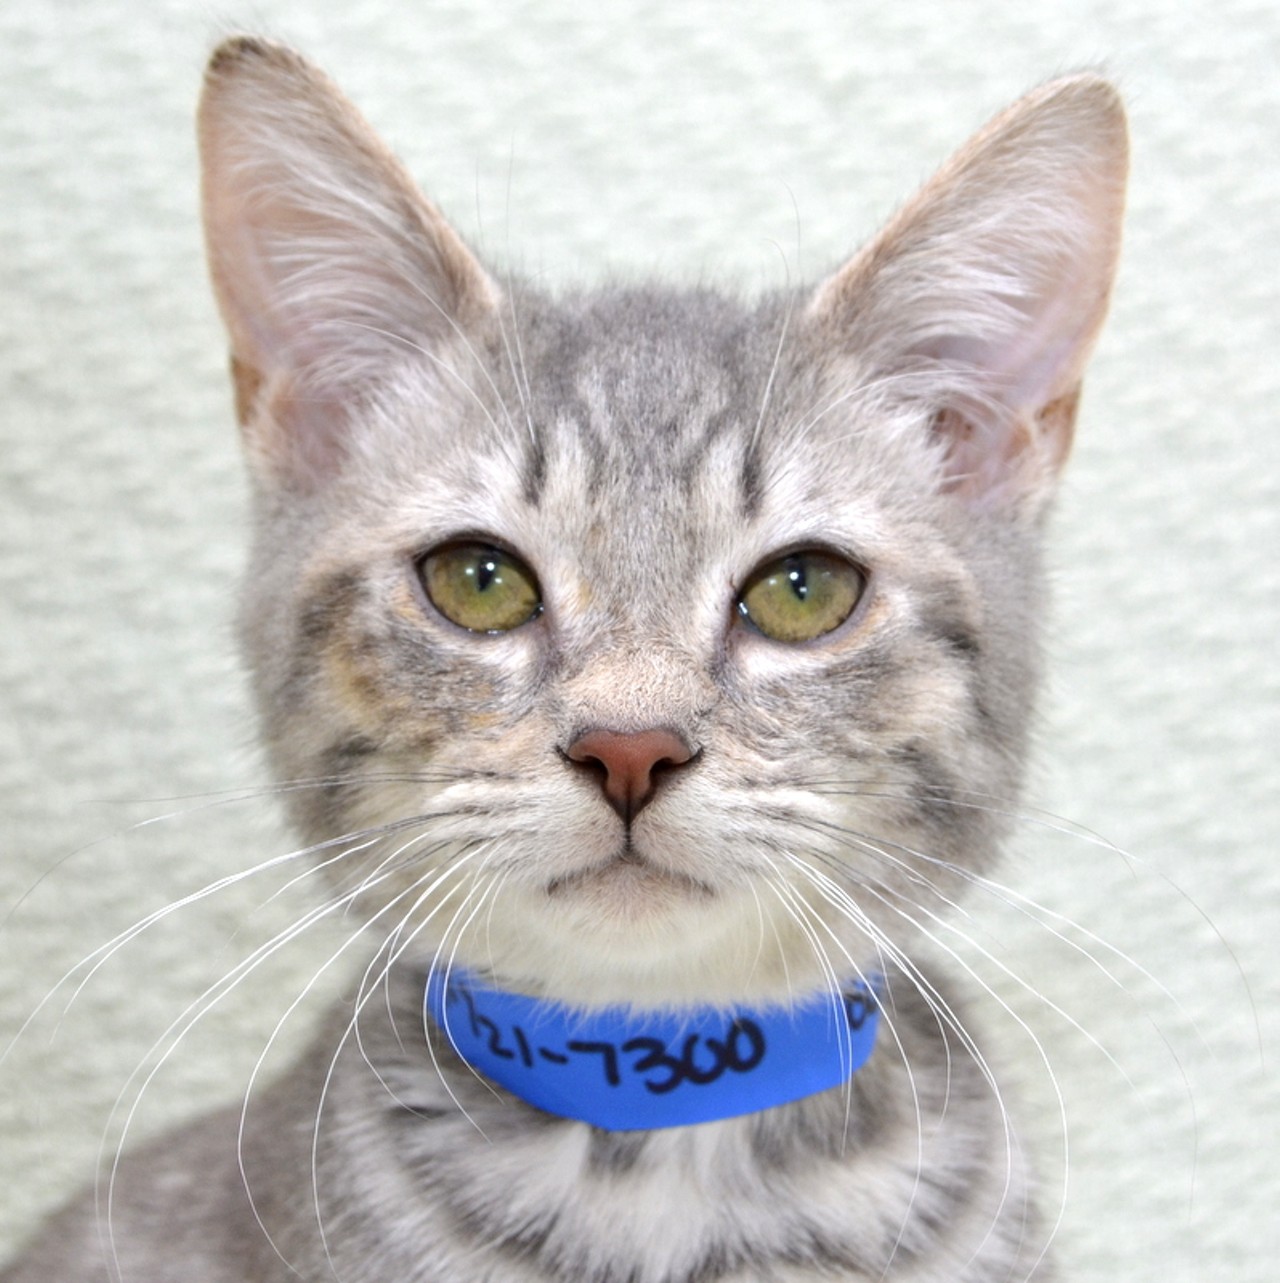 NAME:  Dallas Green
GENDER: Male
BREED: Domestic Short Hair
AGE: 5 months
WEIGHT: 3 pounds
SPECIAL CONSIDERATIONS: Prefers a home with older or no children
REASON I CAME TO MHS: Rescued in Westland
LOCATION: Premier Pet Supply of Novi
ID NUMBER: 867558